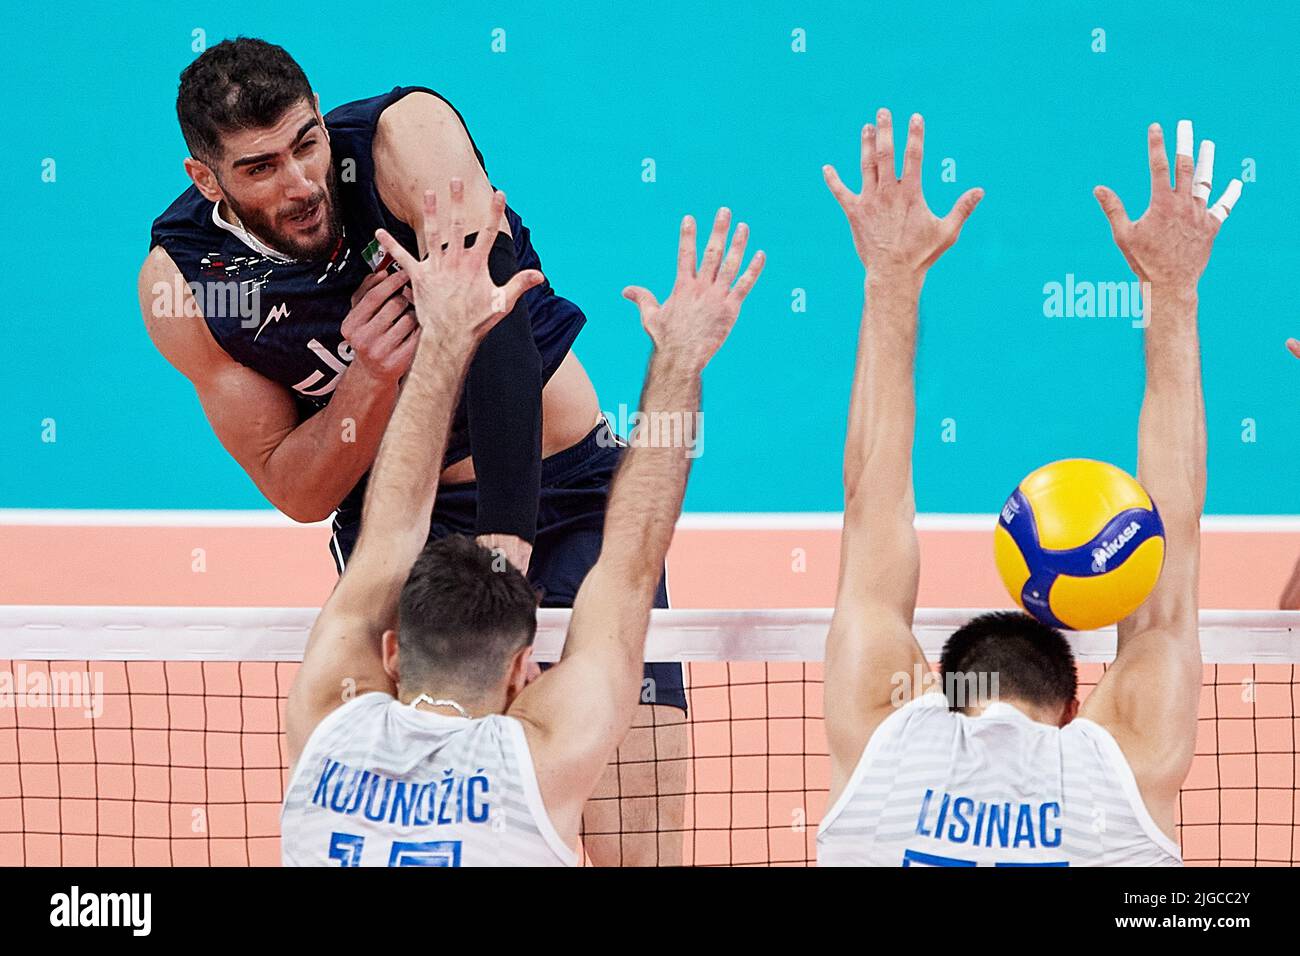 Gdansk, Poland. 09th July, 2022. Esmaeilnezhad Amin (L) of Iran and Milan Kujundzic (L) and Srecko Lisinac (R) of Serbia during the 2022 men's FIVB Volleyball Nations League match between Iran and Serbia in Gdansk, Poland, 09 July 2022. Credit: PAP/Alamy Live News Stock Photo